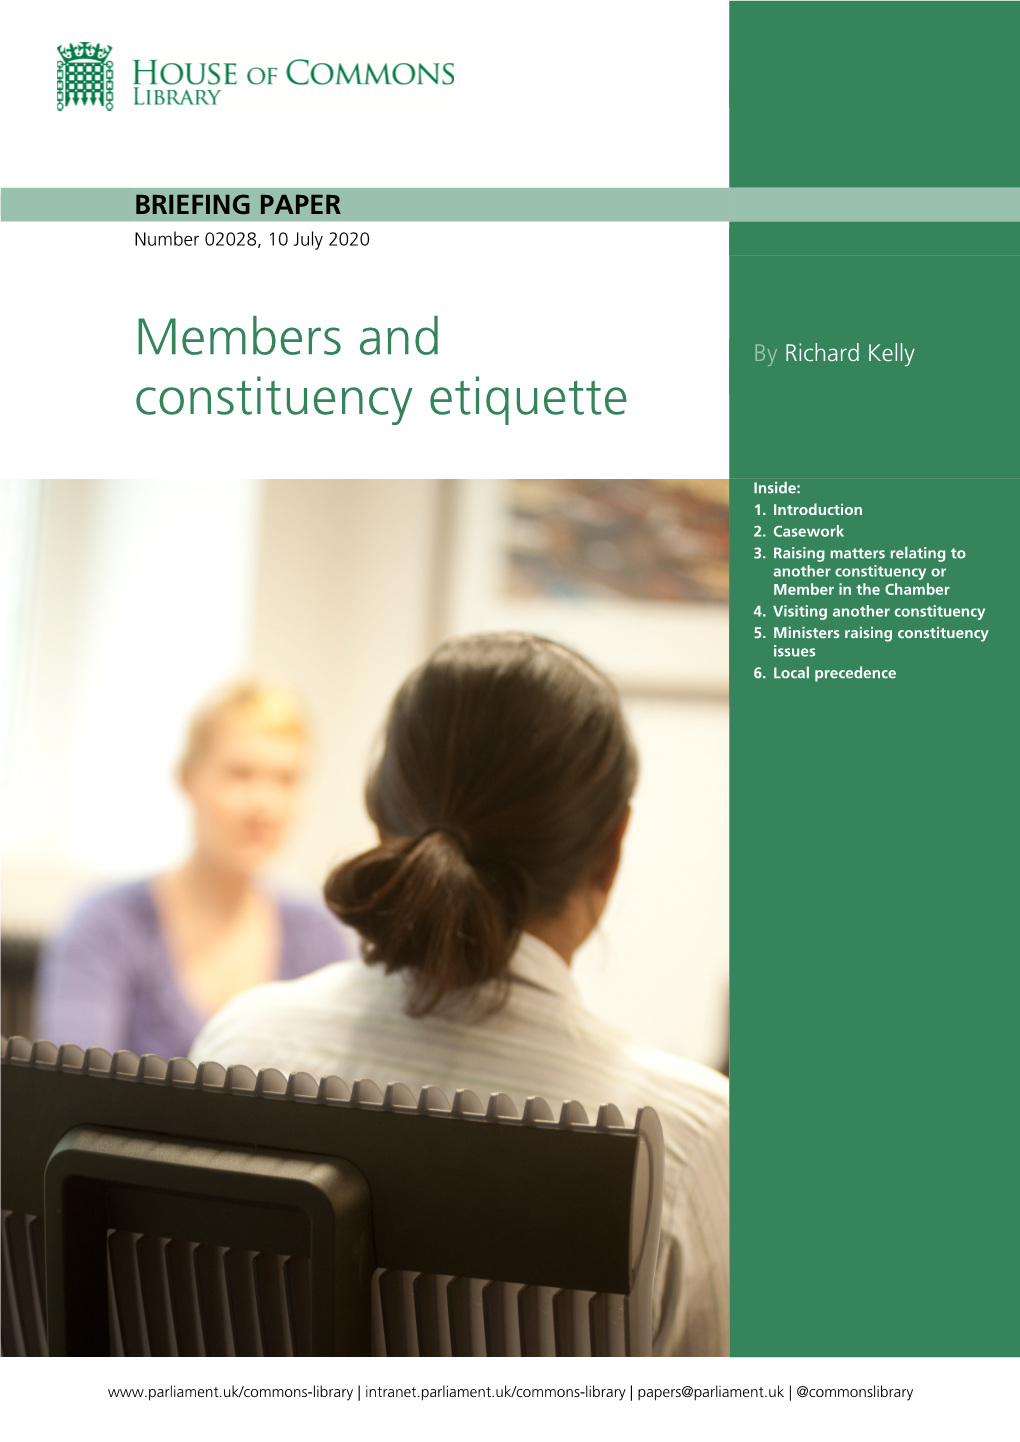 Members and Constituency Etiquette